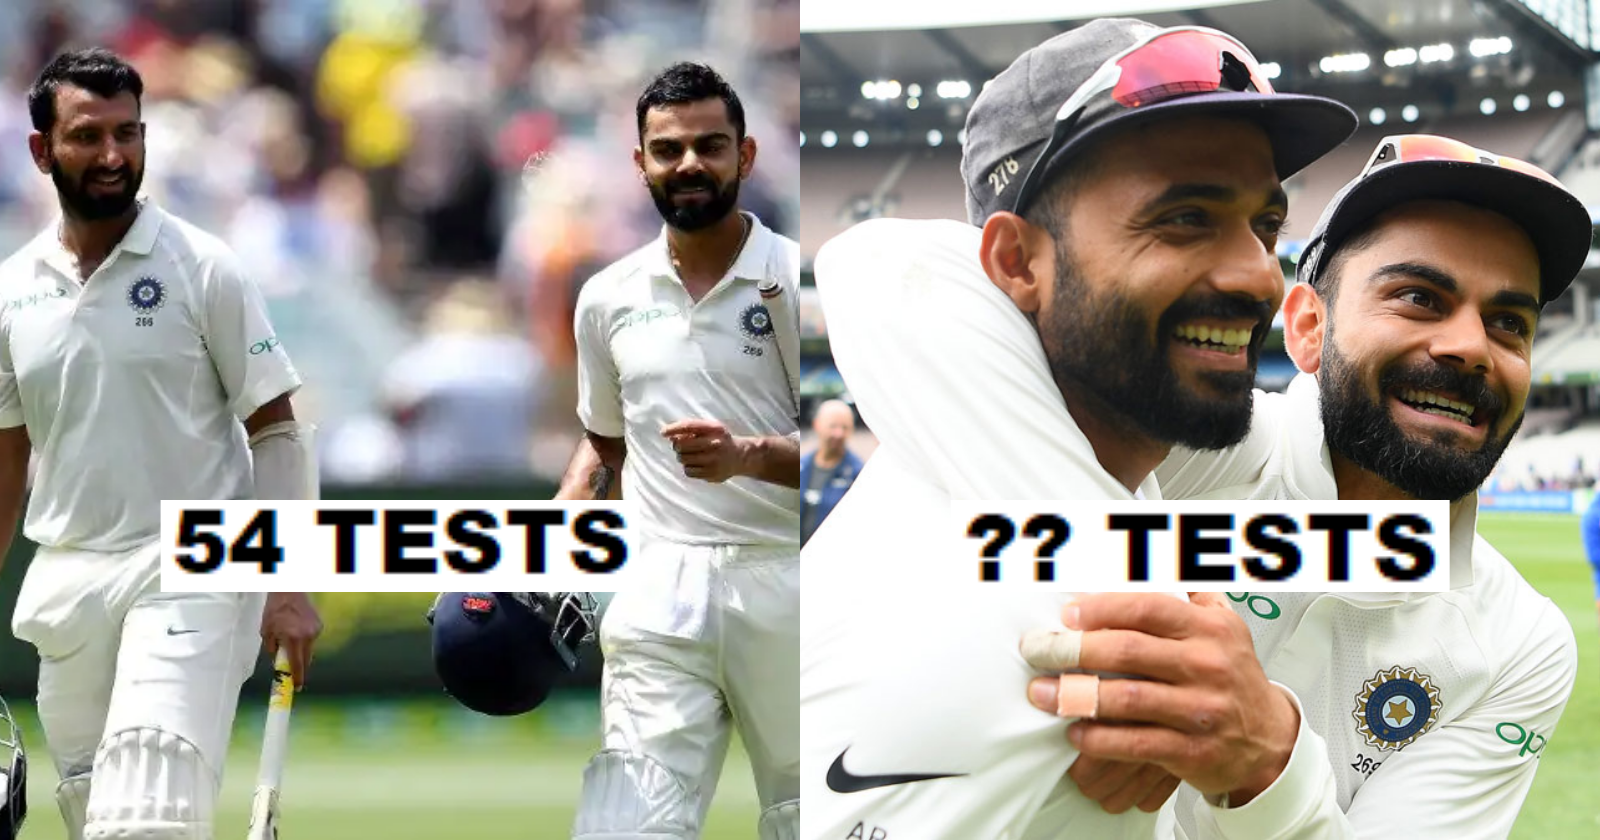 5 Most Selected Players In Virat Kohli's 60 Tests As A Captain